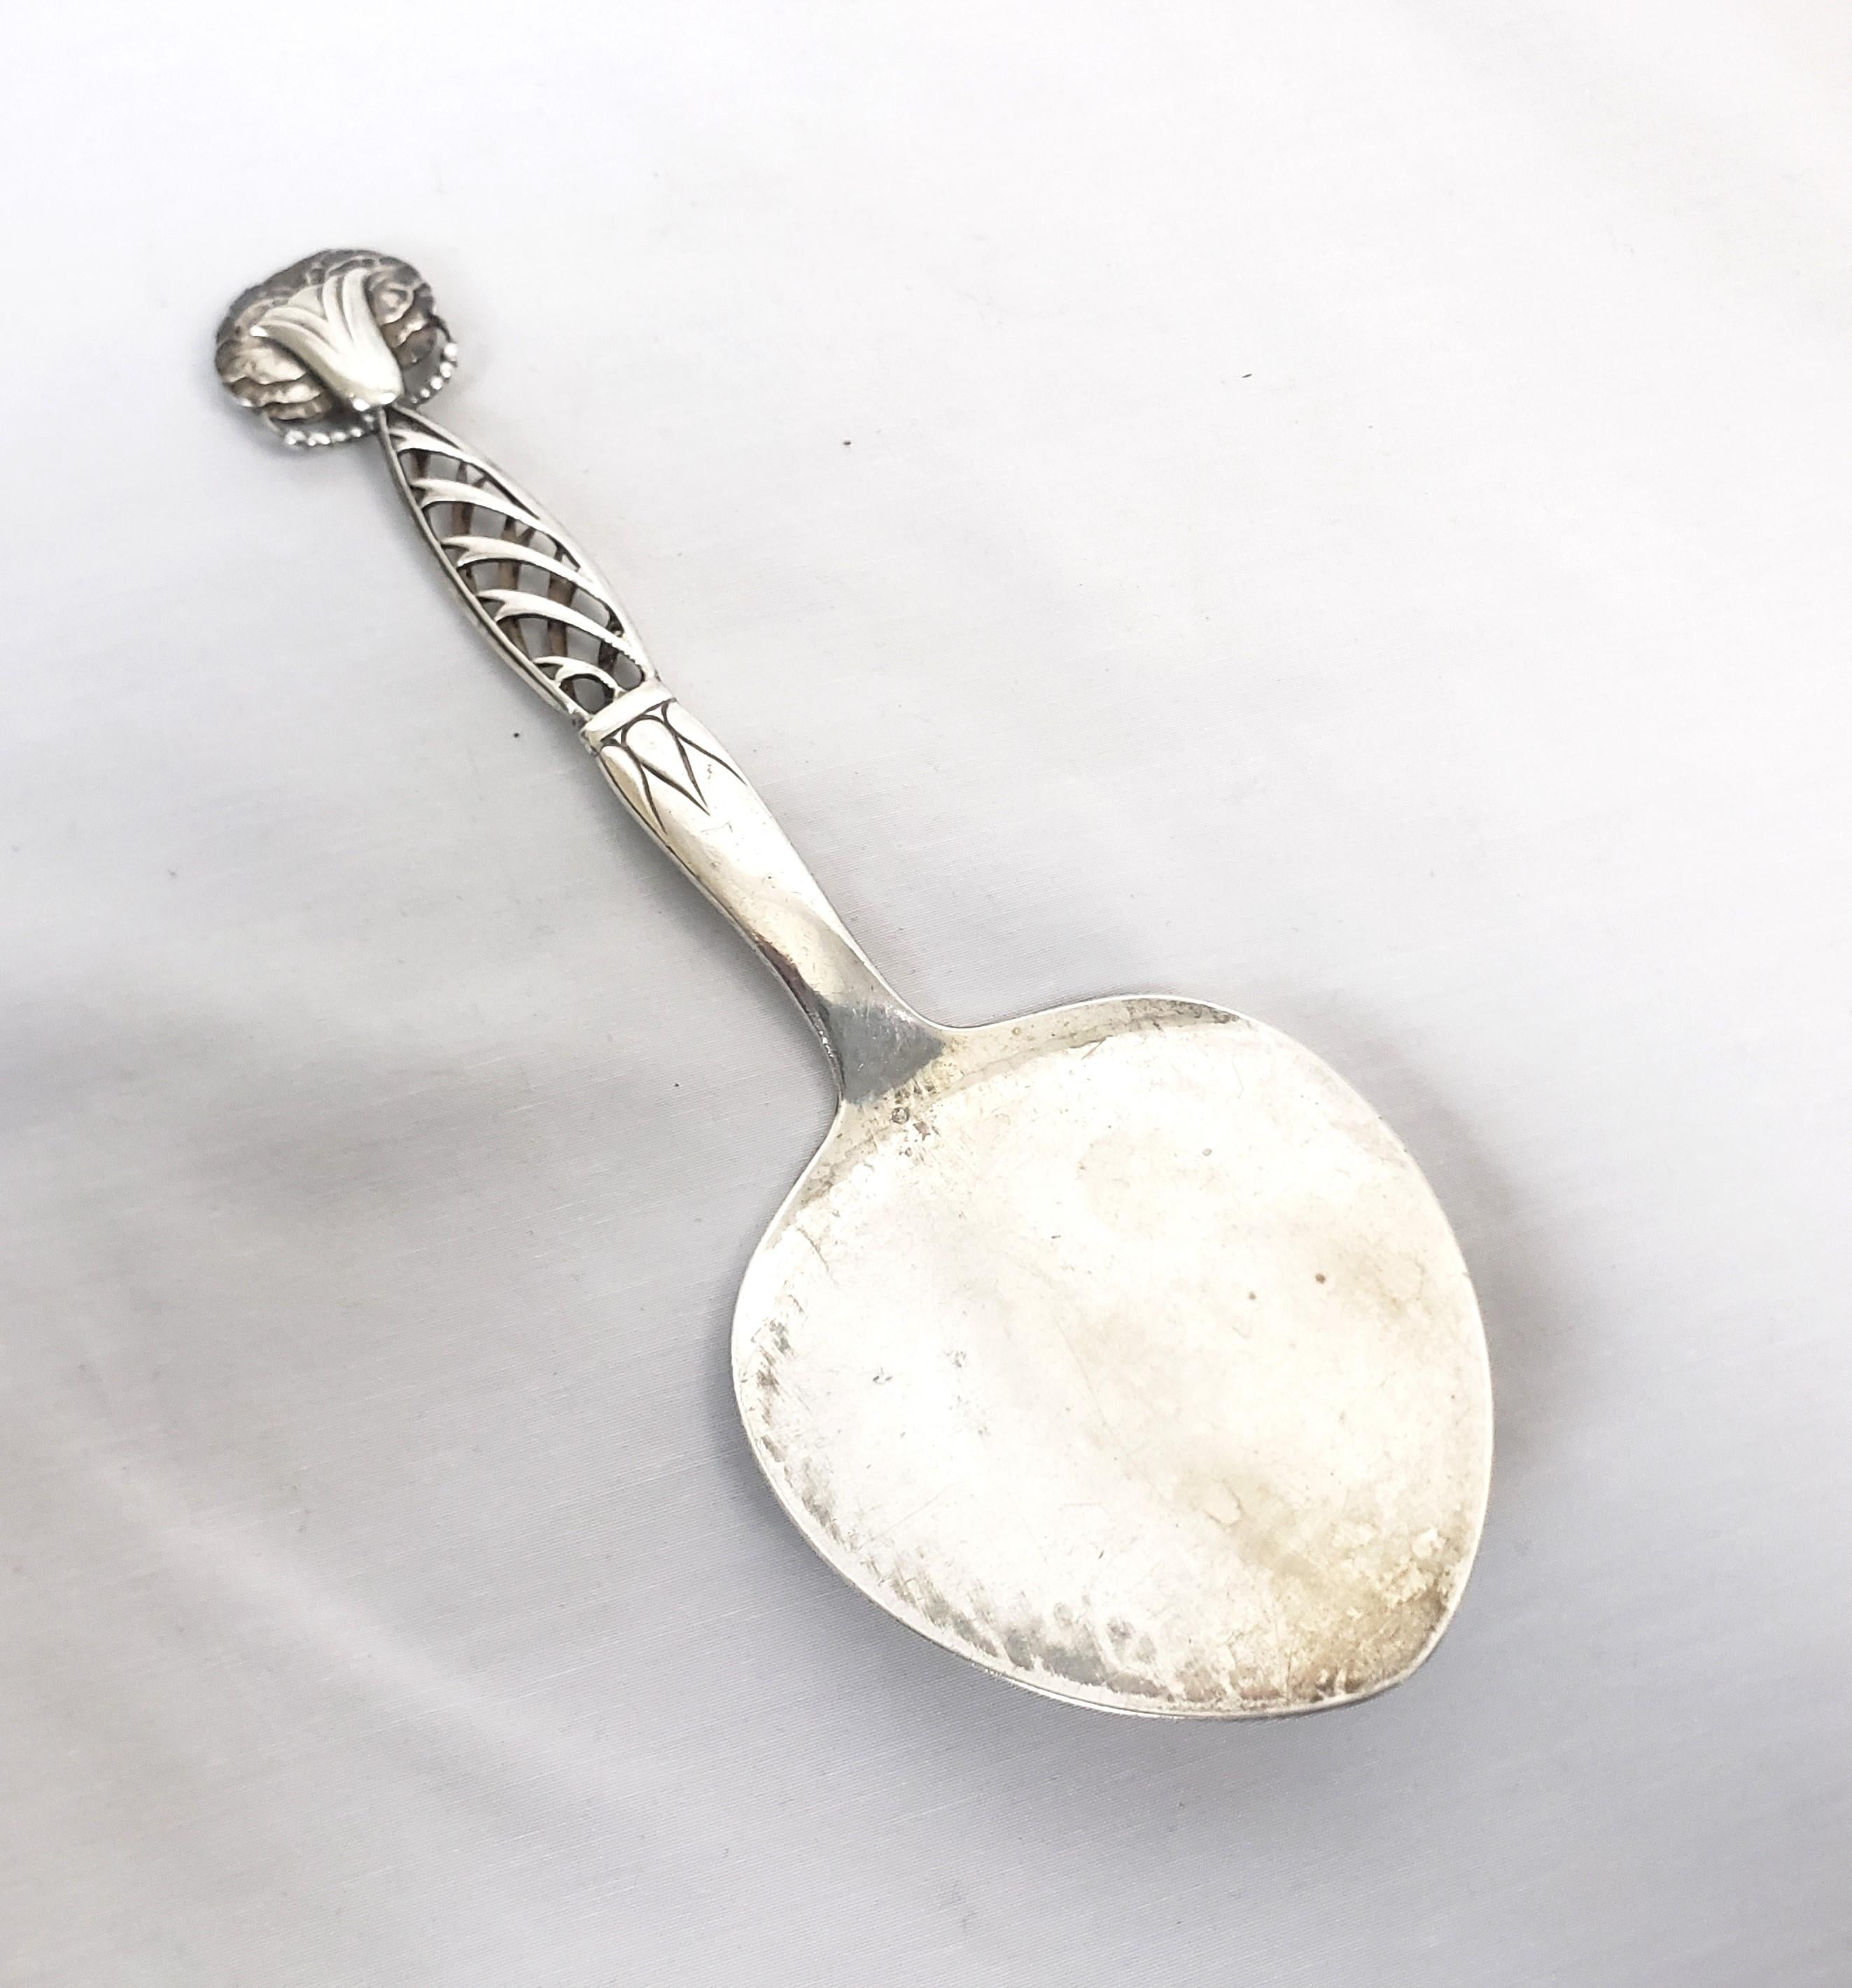 This antique tomato server was made by the renowned Georg Jensen of Denmark and dates to approximately 1920. This server is done in his rare 'Ornamental 83' and is composed of sterling silver. The piece is clearly signed on the back with the Jensen